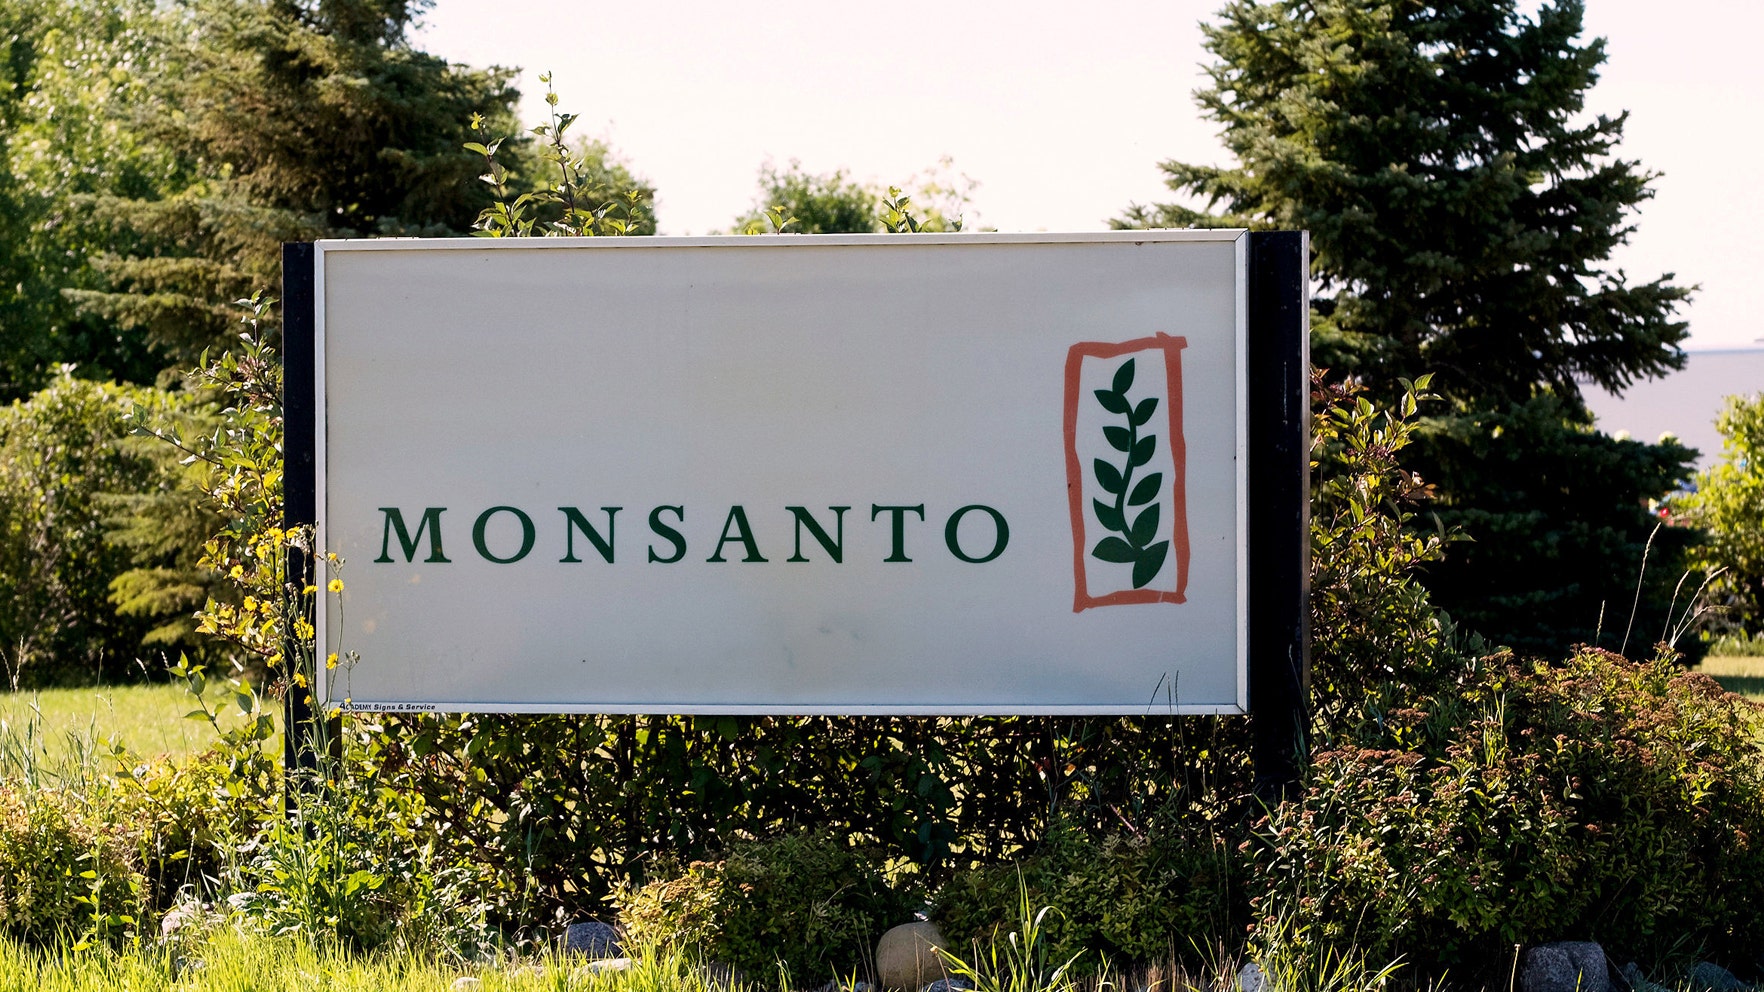 WA school employees sue Monsanto for $165 million over toxic contamination leaked from light fixtures